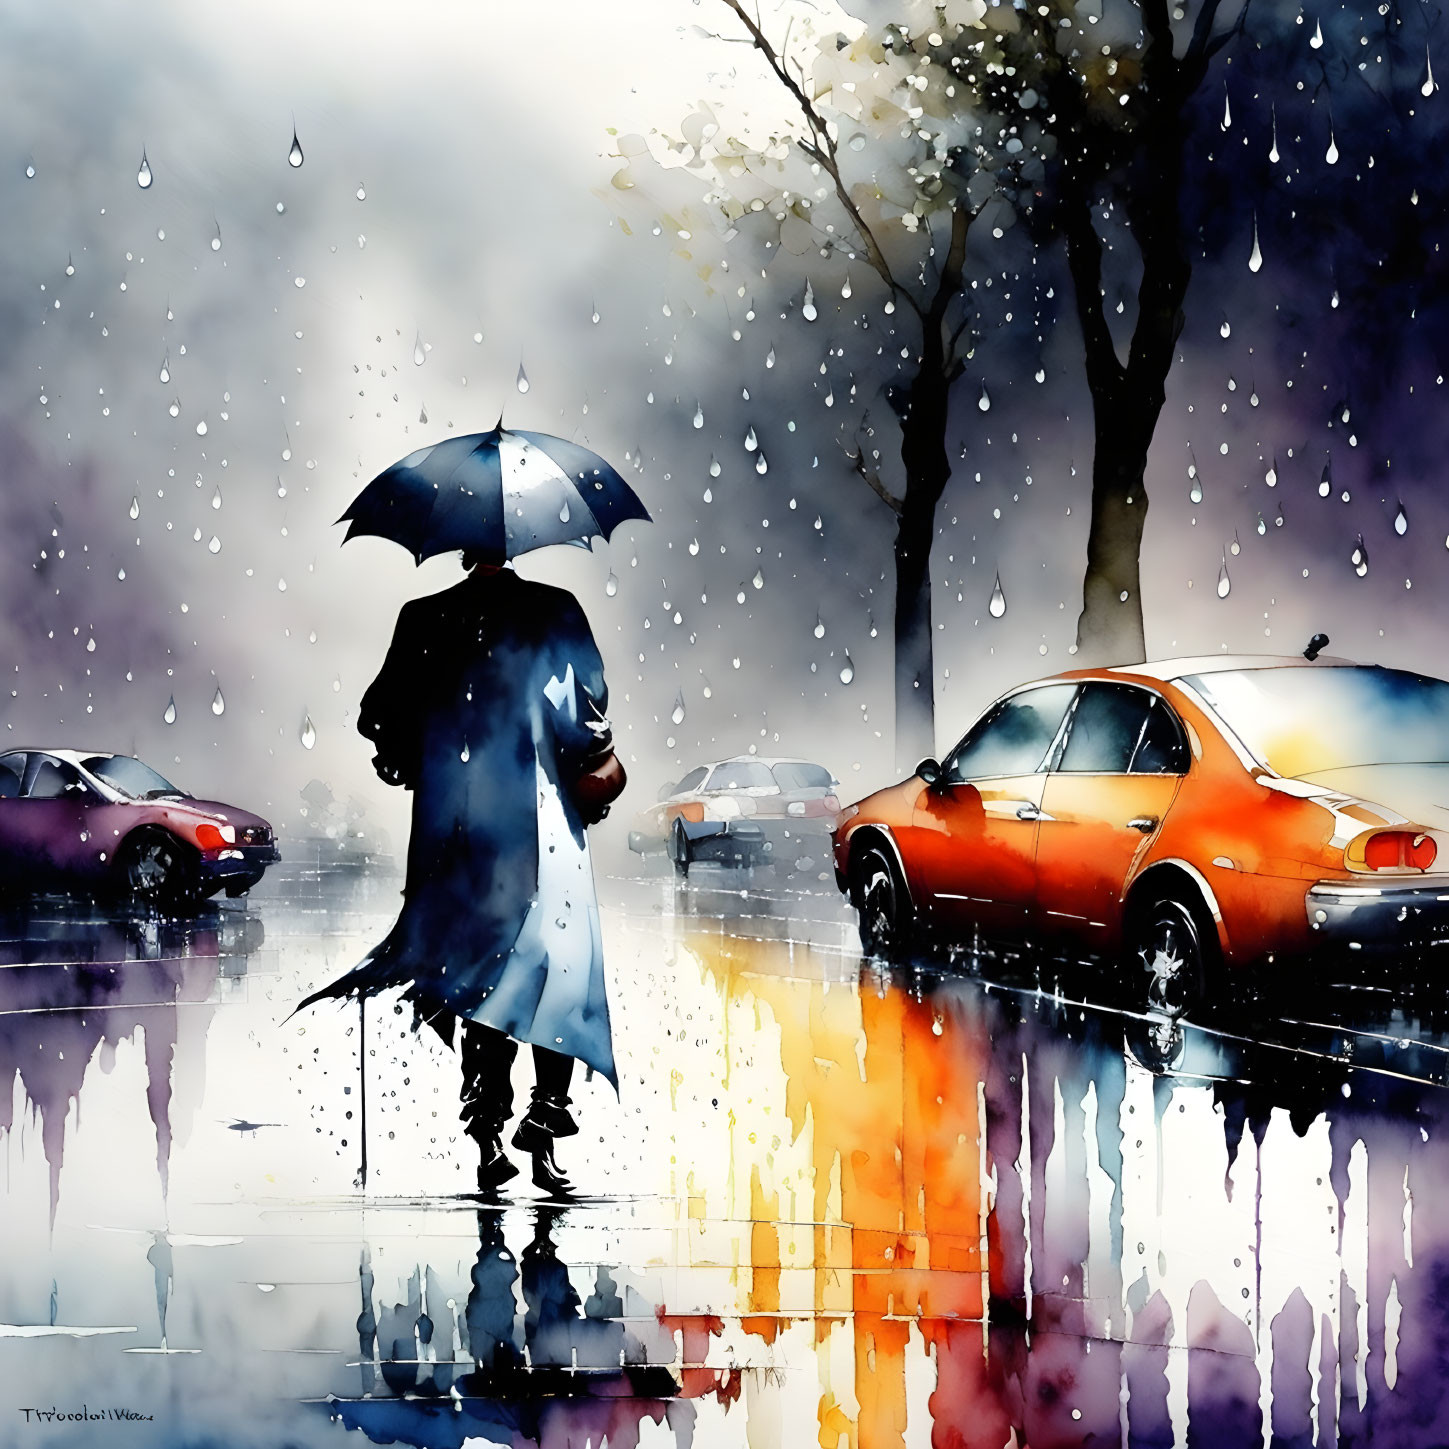 Person with umbrella on wet street with colorful reflections, cars nearby in vibrant rain scene